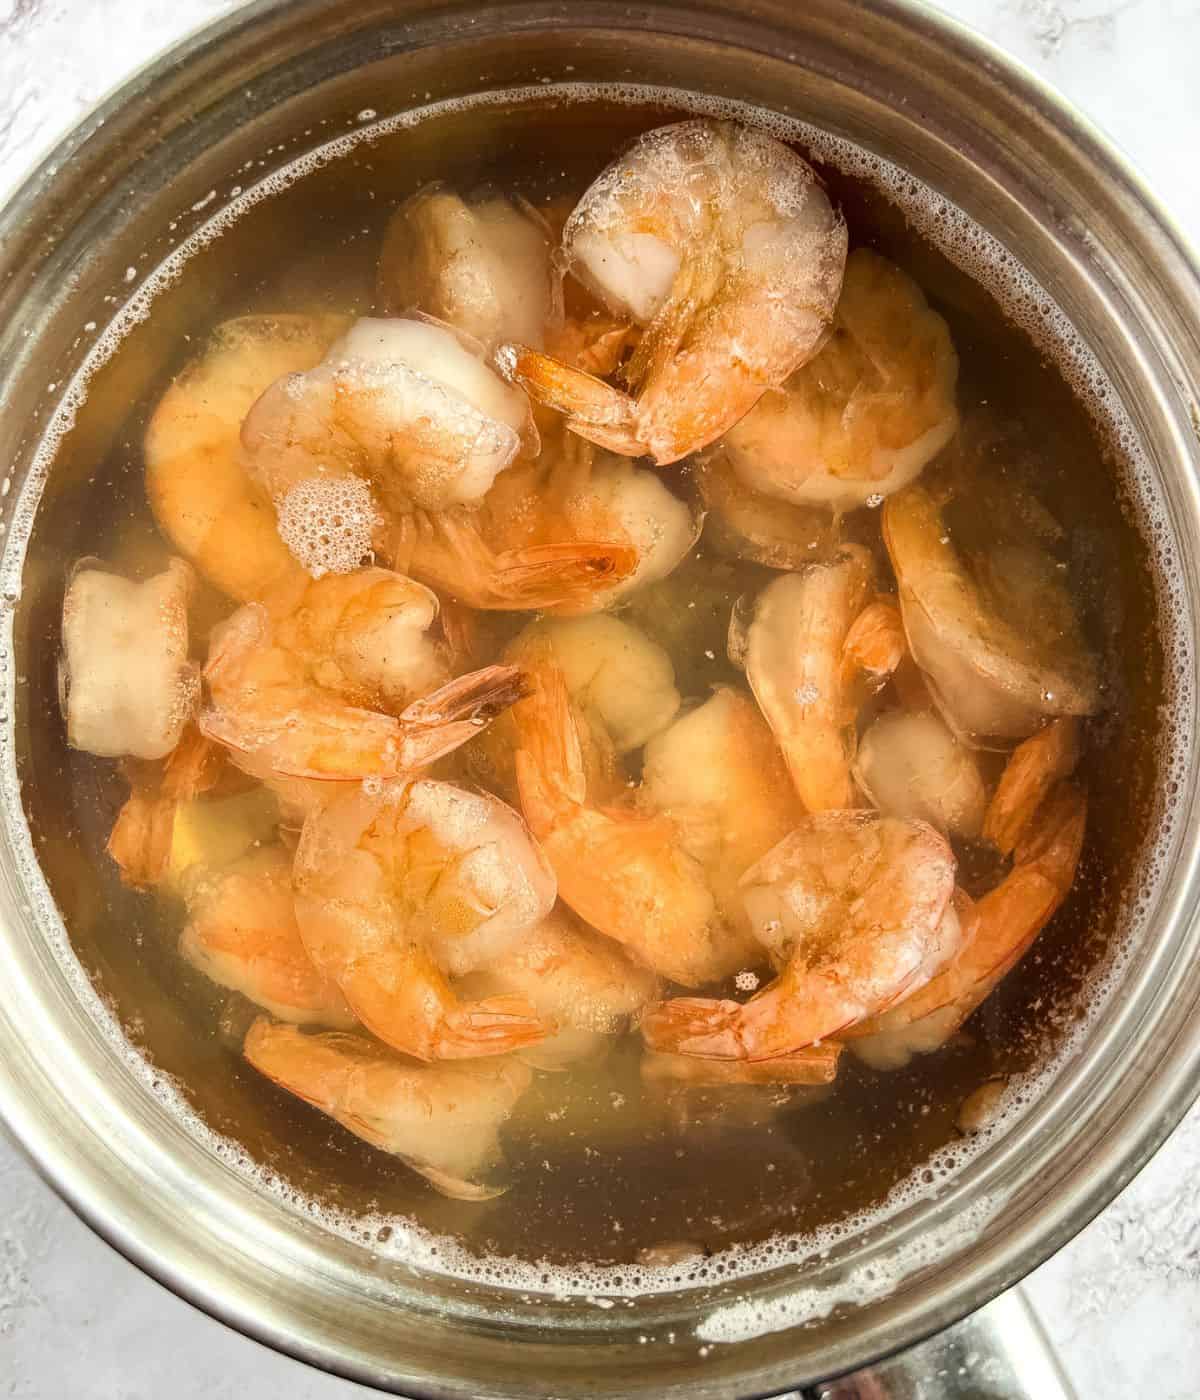 Cooking shrimp and saving the water for cooking.